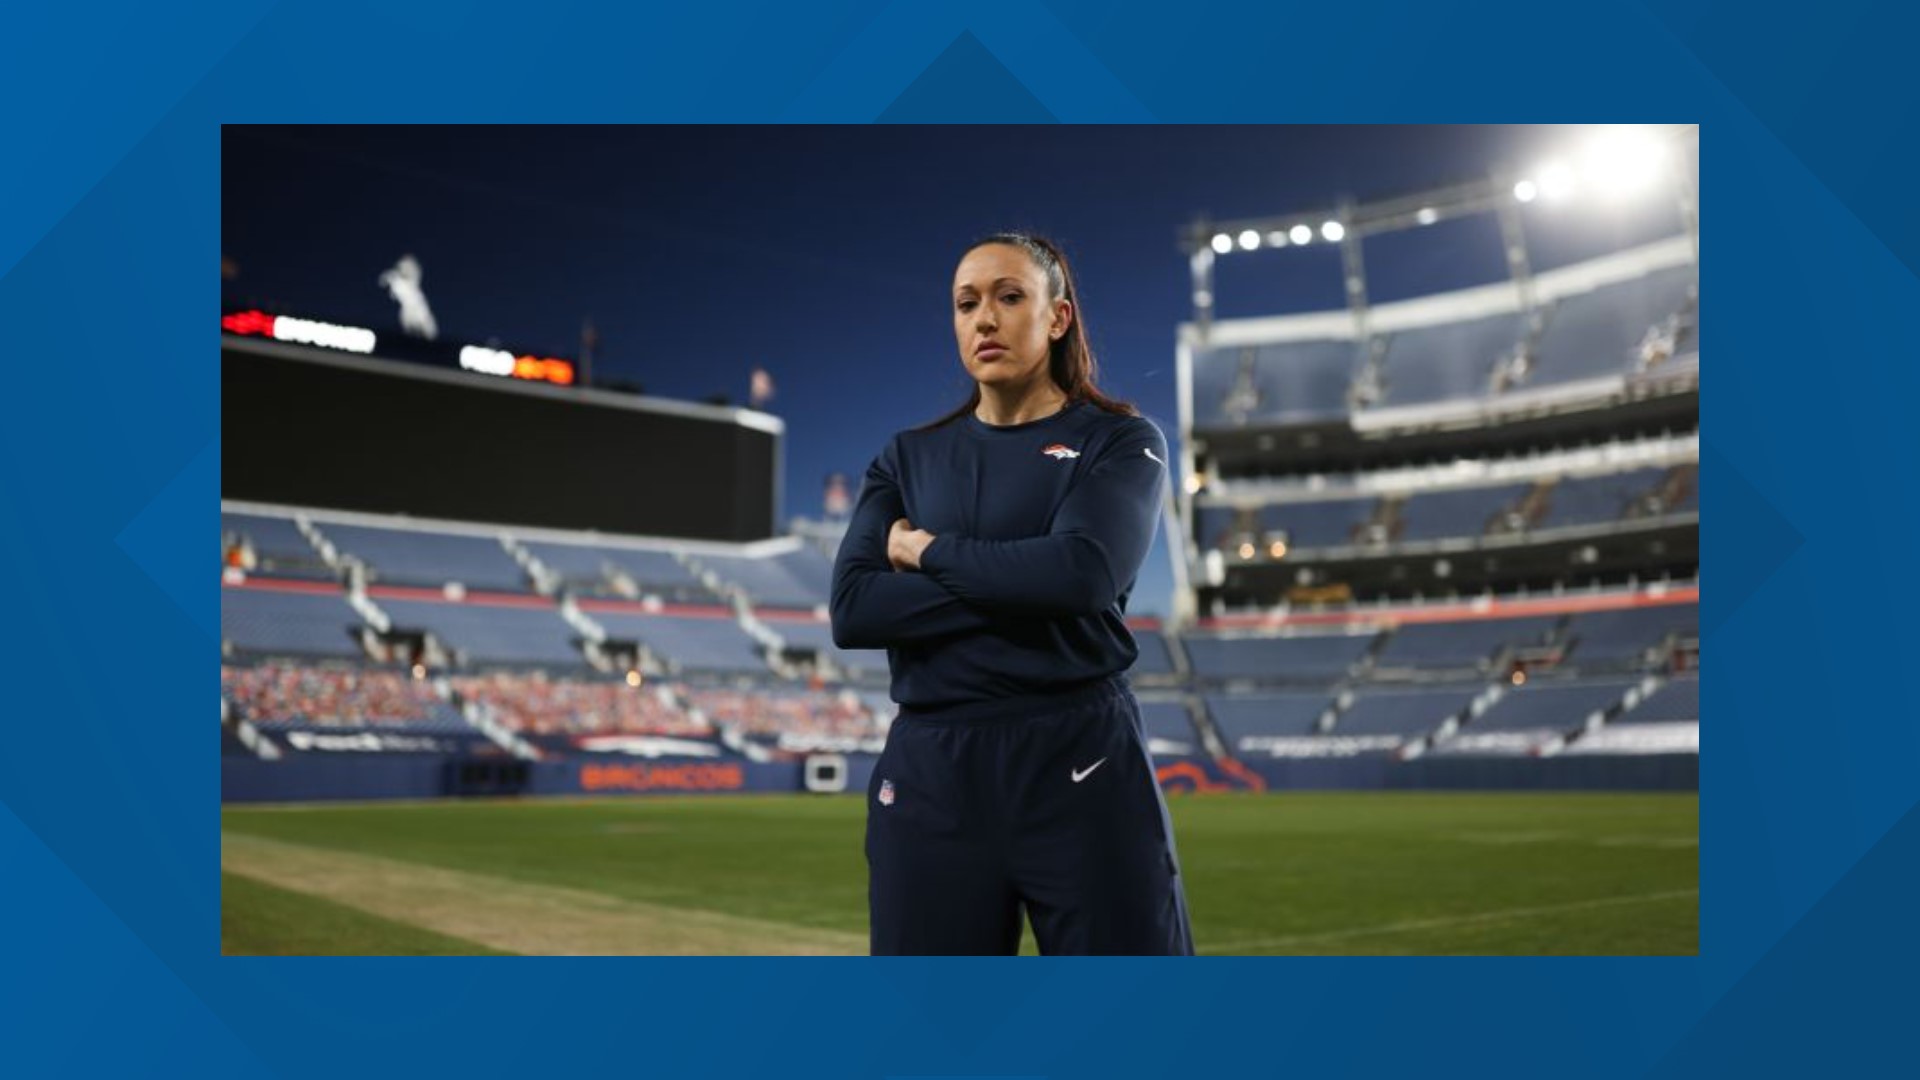 Emily Zaler became the first-ever full-time female coach with the Denver Broncos in 2020 when she was promoted from the NFL Bill Walsh Diversity Coaching Fellowship.